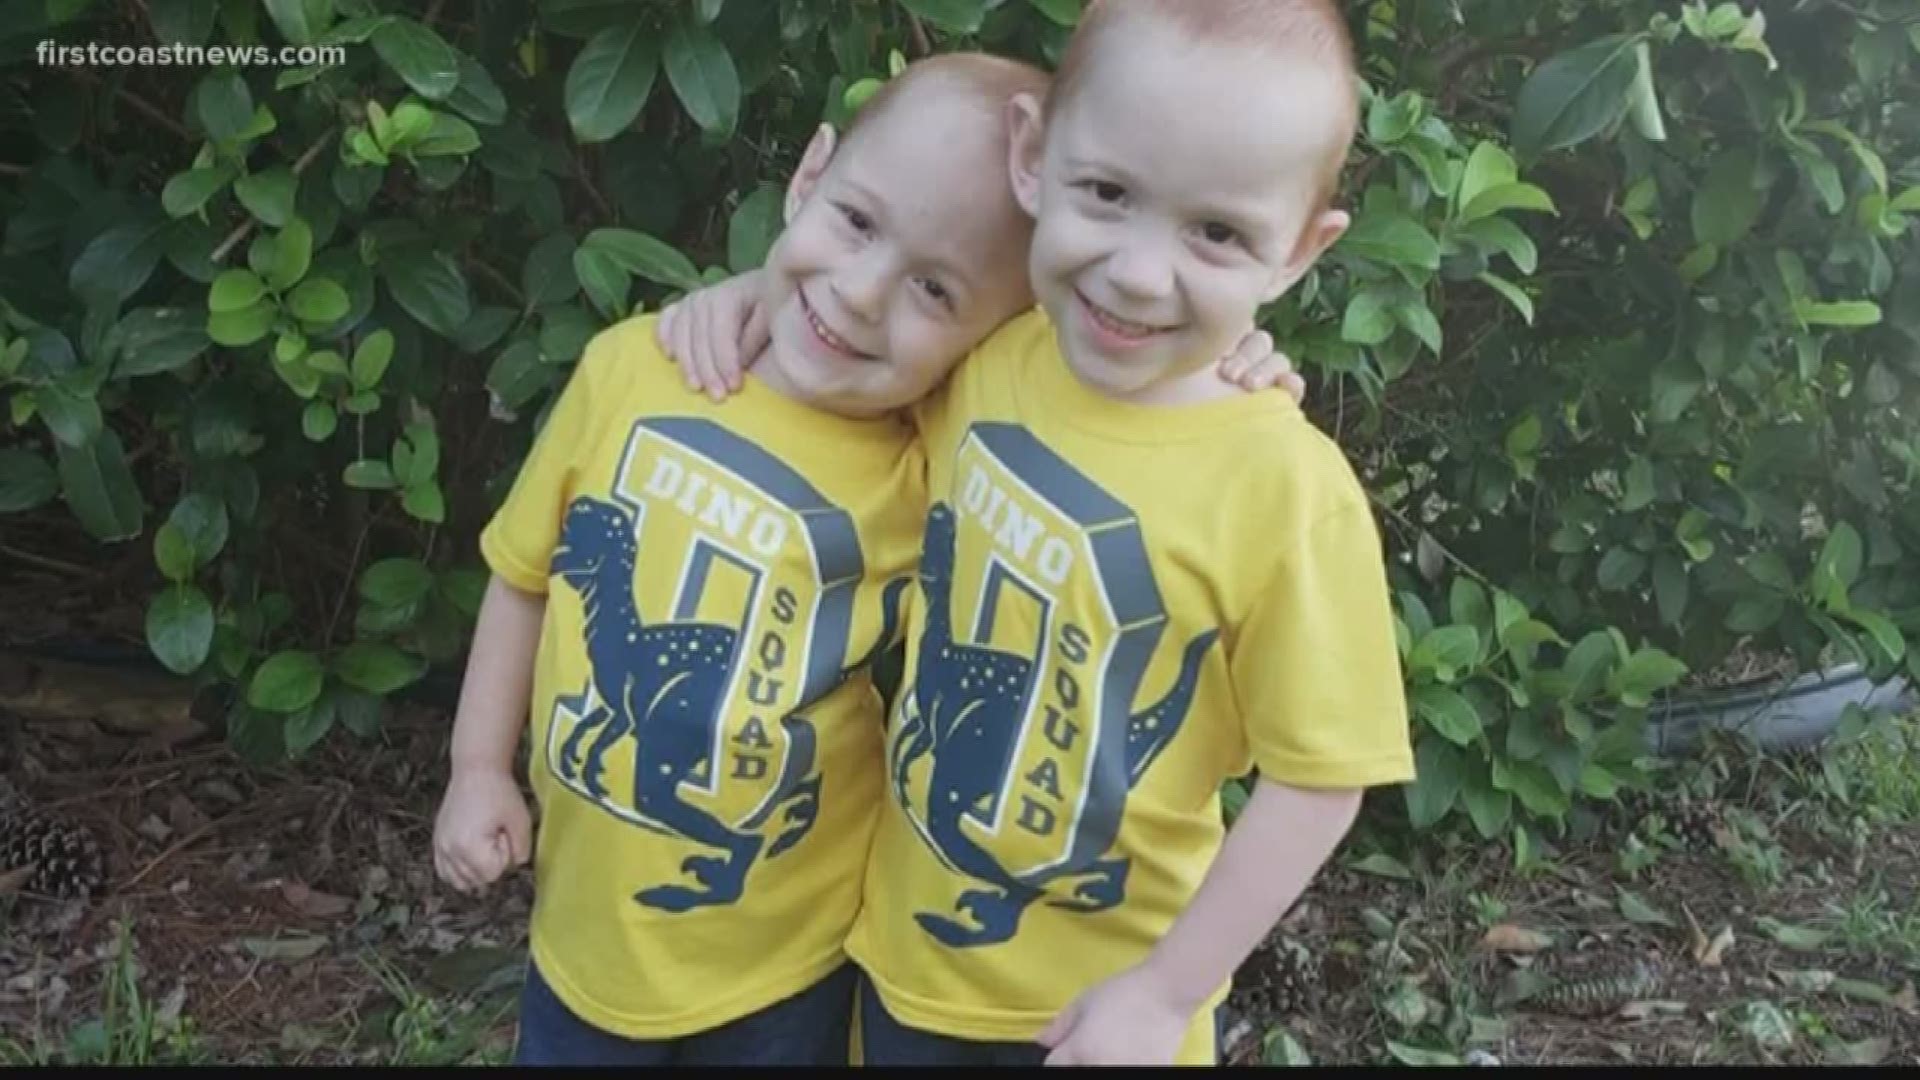 Four years ago, two twin boys captured the hearts of Jacksonville residents and all over the world.